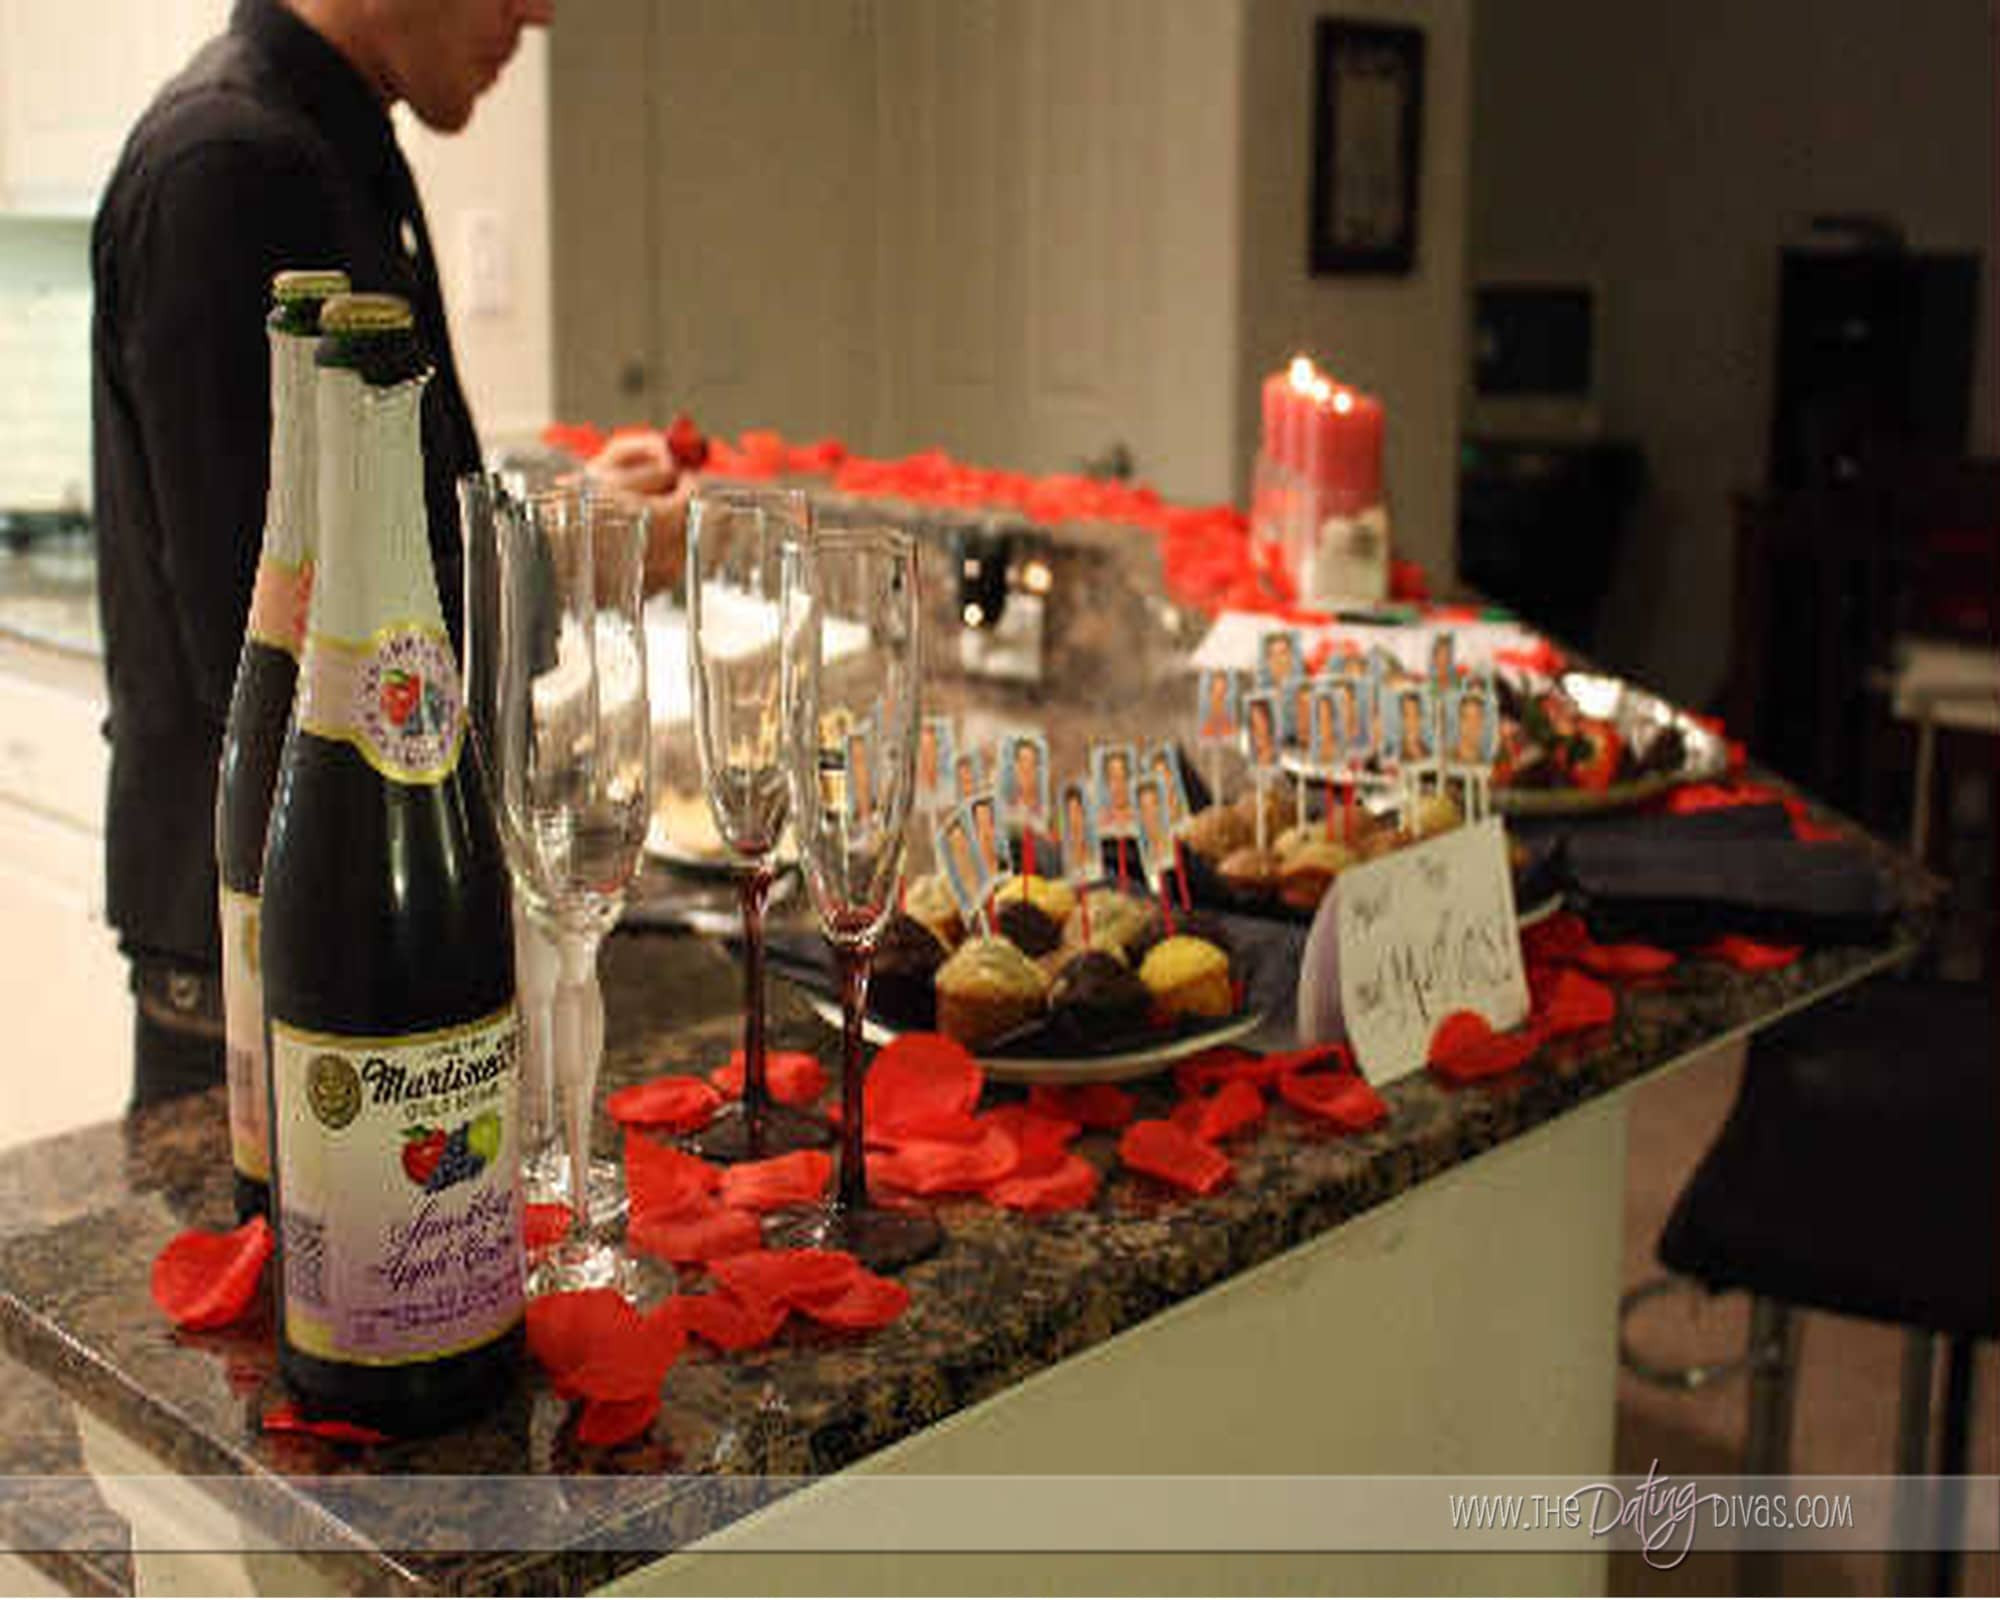 The 22 Best Ideas for Bachelorette Viewing Party Ideas - Home, Family